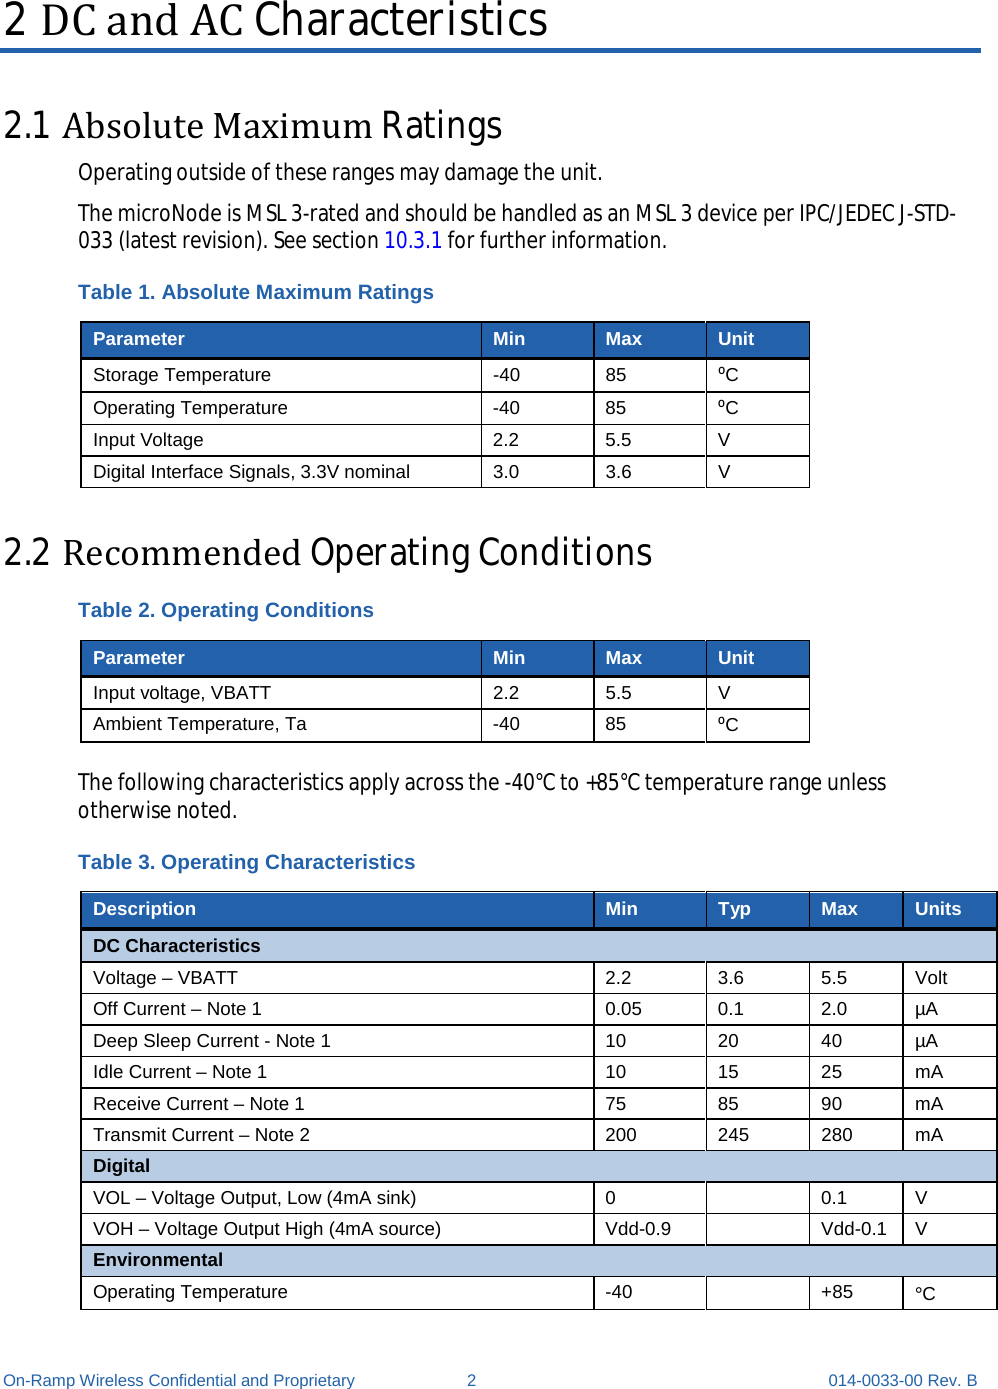  On-Ramp Wireless Confidential and Proprietary  2  014-0033-00 Rev. B 2 DC and AC Characteristics 2.1 Absolute Maximum Ratings Operating outside of these ranges may damage the unit. The microNode is MSL 3-rated and should be handled as an MSL 3 device per IPC/JEDEC J-STD-033 (latest revision). See section 10.3.1 for further information. Table 1. Absolute Maximum Ratings Parameter Min Max Unit Storage Temperature  -40 85 ⁰C Operating Temperature  -40 85 ⁰C Input Voltage 2.2 5.5  V Digital Interface Signals, 3.3V nominal 3.0 3.6  V 2.2 Recommended Operating Conditions Table 2. Operating Conditions Parameter Min Max Unit Input voltage, VBATT 2.2 5.5  V Ambient Temperature, Ta  -40 85 ⁰C  The following characteristics apply across the -40°C to +85°C temperature range unless otherwise noted. Table 3. Operating Characteristics Description Min Typ Max Units DC Characteristics Voltage – VBATT  2.2 3.6 5.5  Volt Off Current – Note 1 0.05 0.1 2.0  µA Deep Sleep Current - Note 1 10 20 40 µA Idle Current – Note 1 10 15 25 mA Receive Current – Note 1 75 85 90 mA Transmit Current – Note 2 200 245 280 mA Digital VOL – Voltage Output, Low (4mA sink)  0    0.1  V VOH – Voltage Output High (4mA source)  Vdd-0.9    Vdd-0.1  V Environmental Operating Temperature  -40    +85 °C 